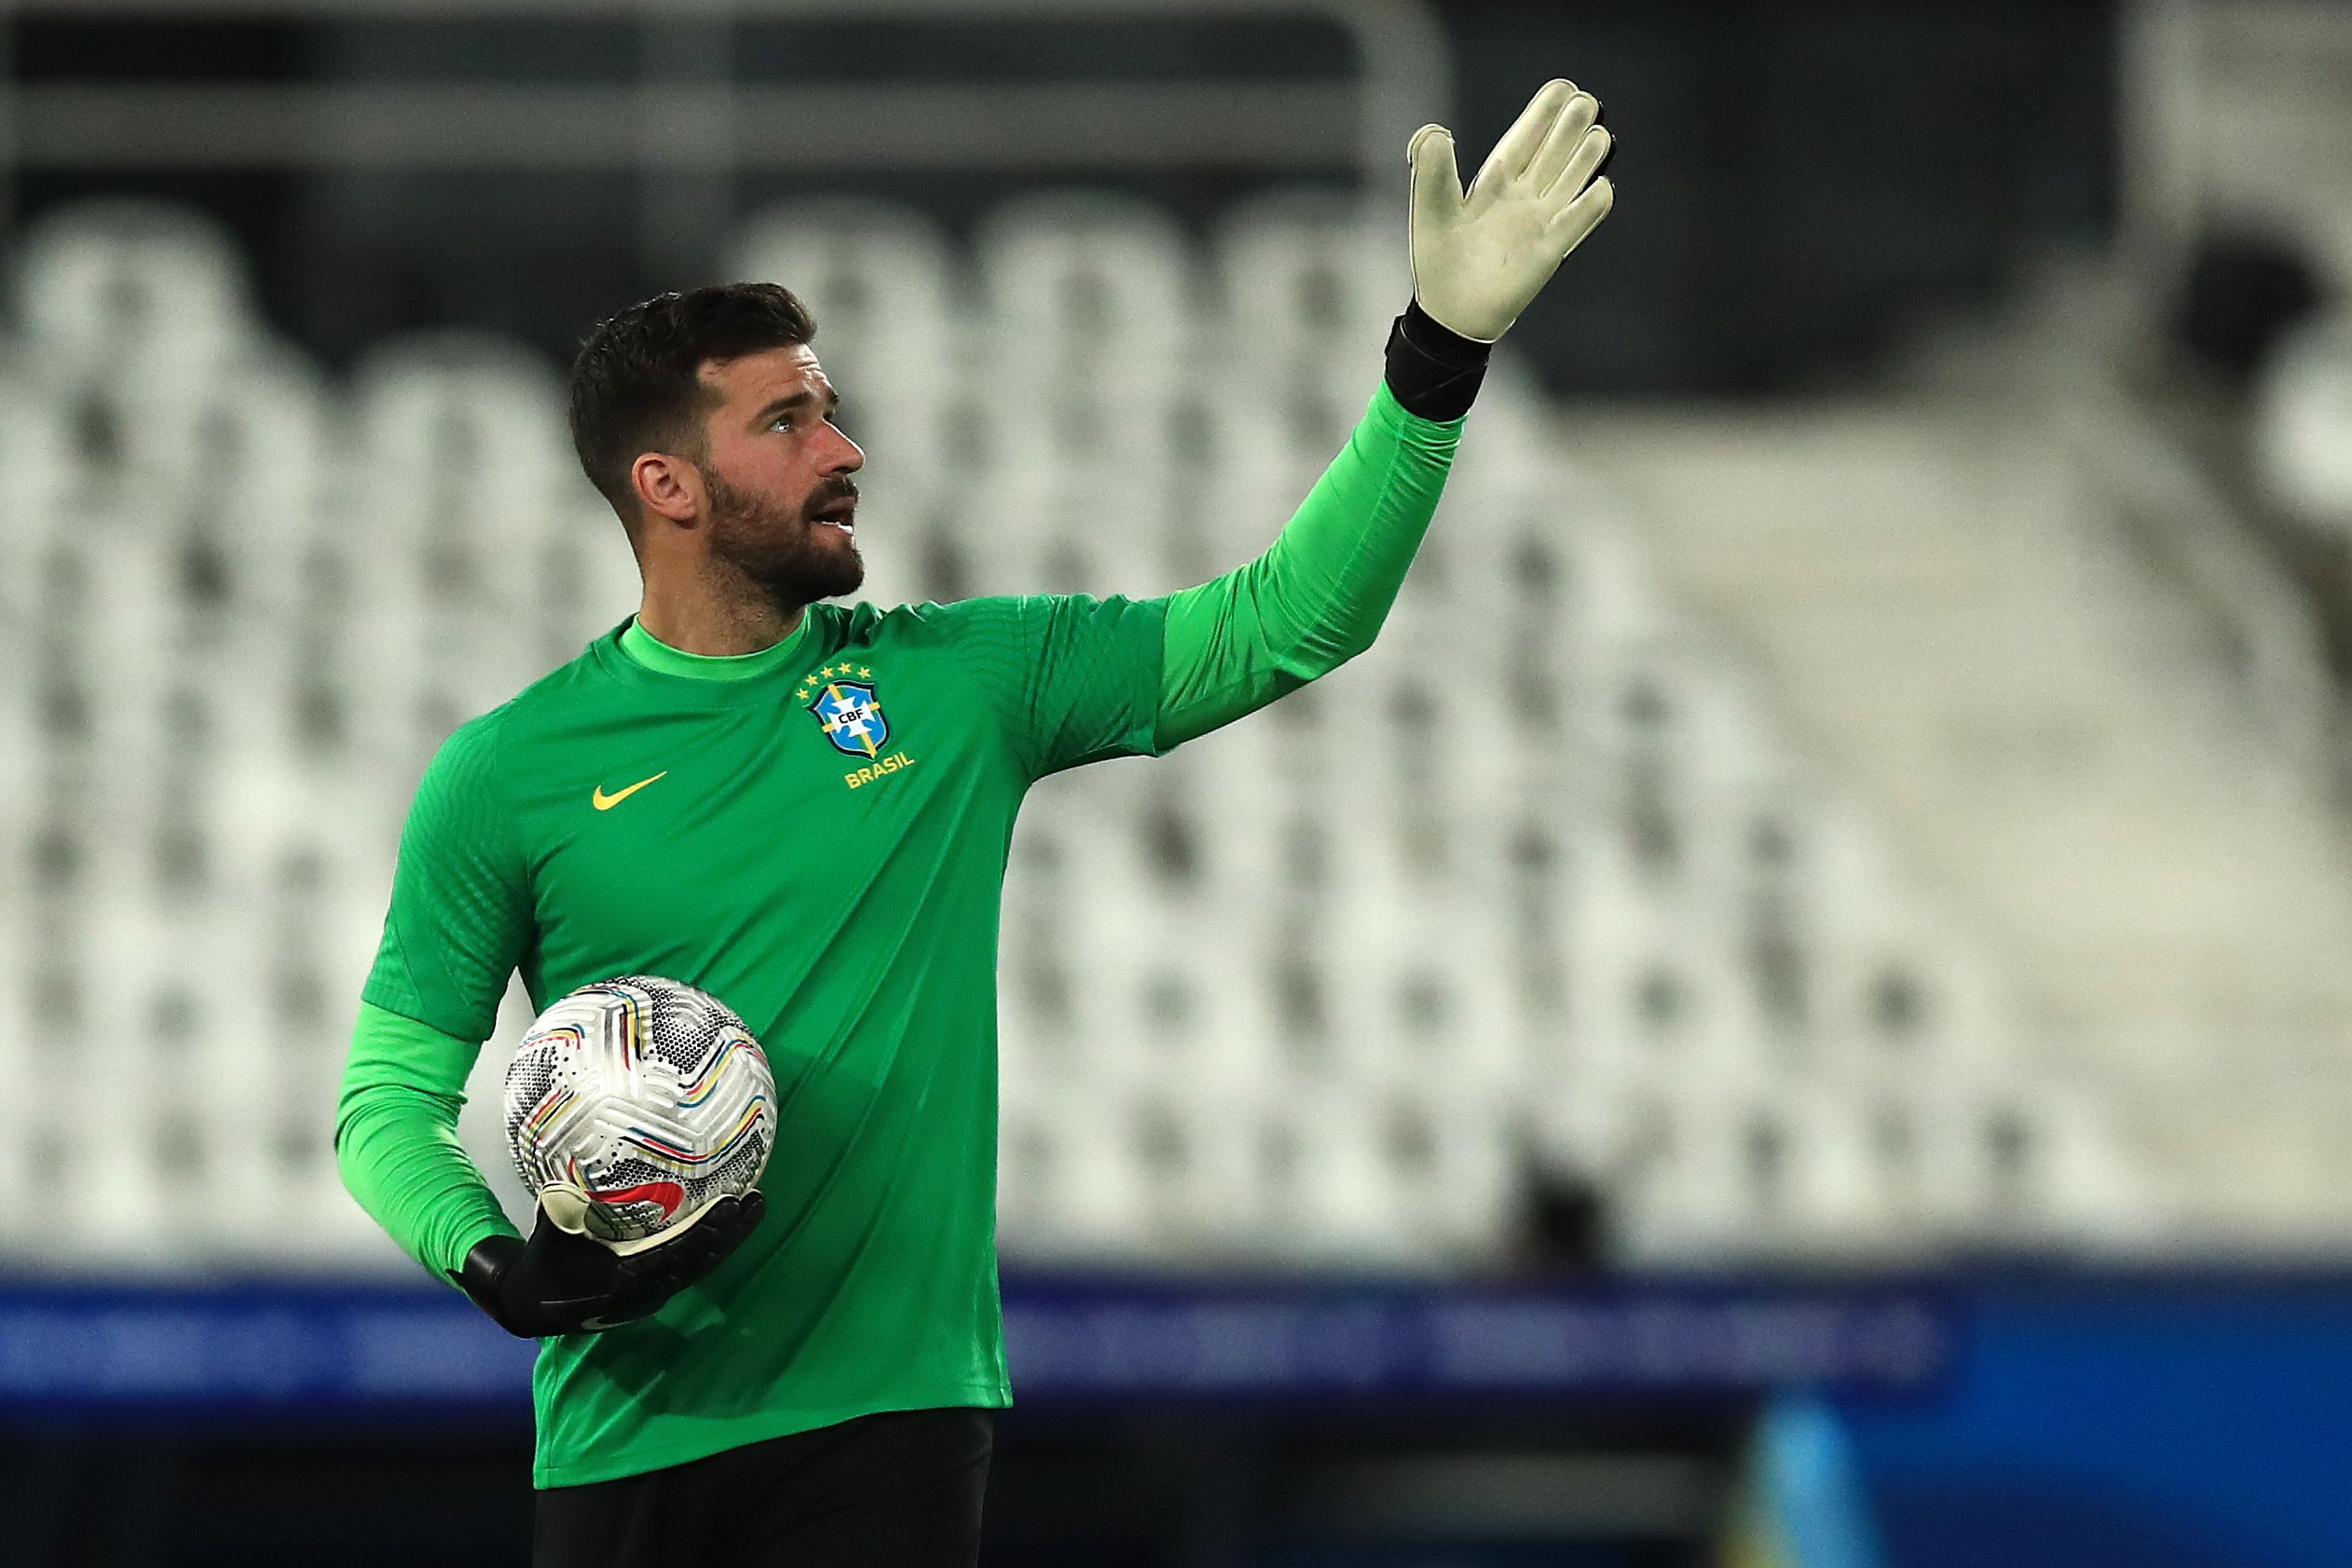 Alisson Becker of Brazil gestures before a semi-final match at the Copa America in 2021